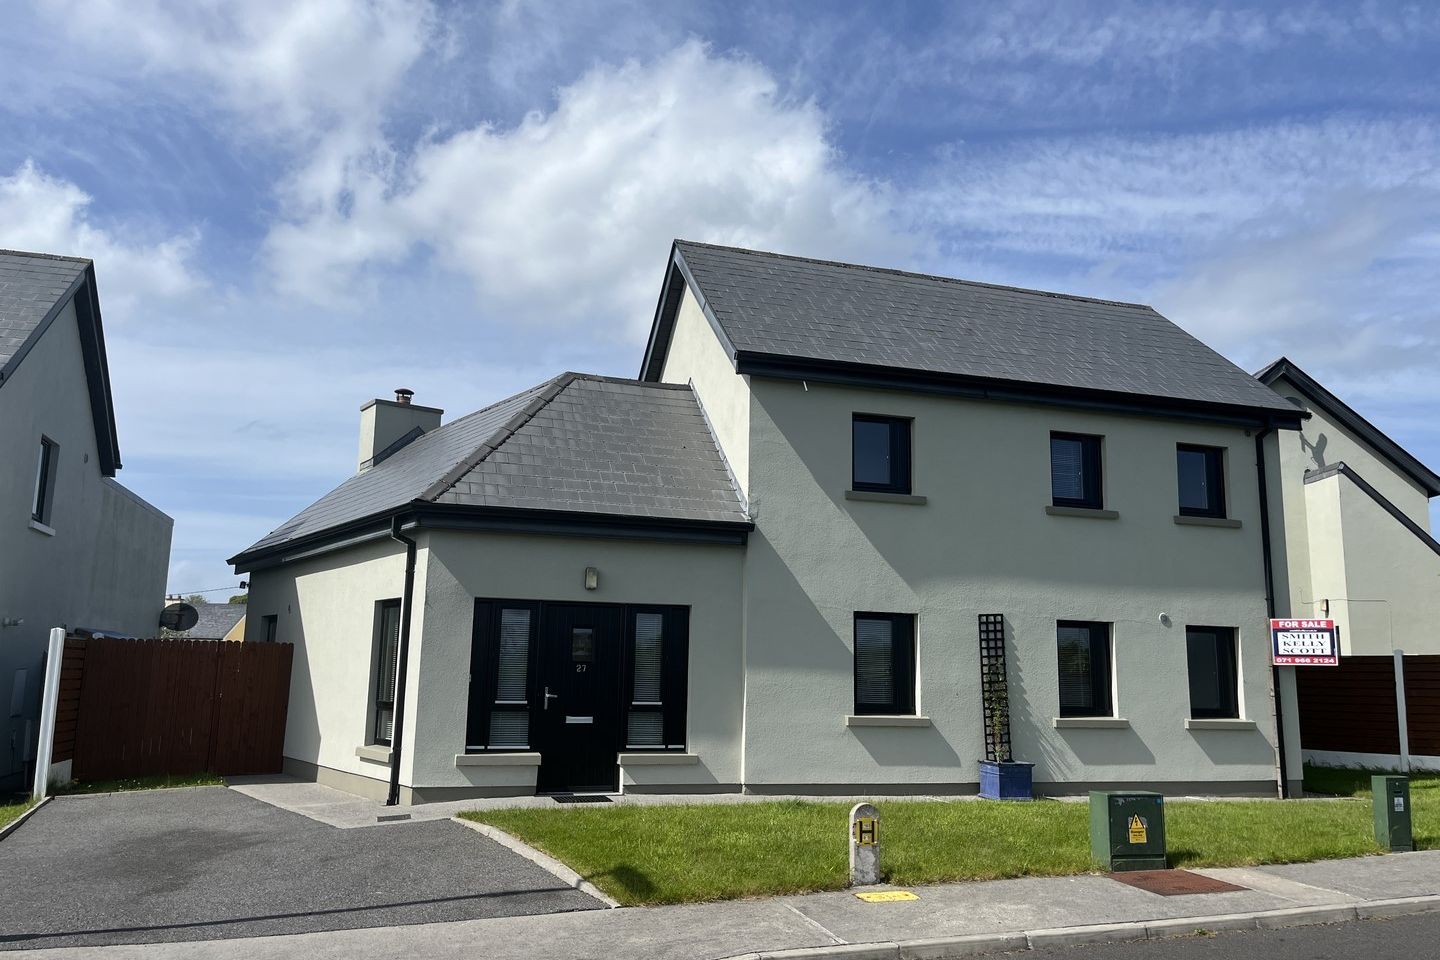 27 Lindenwood, Cootehall, Cootehall, Co. Roscommon